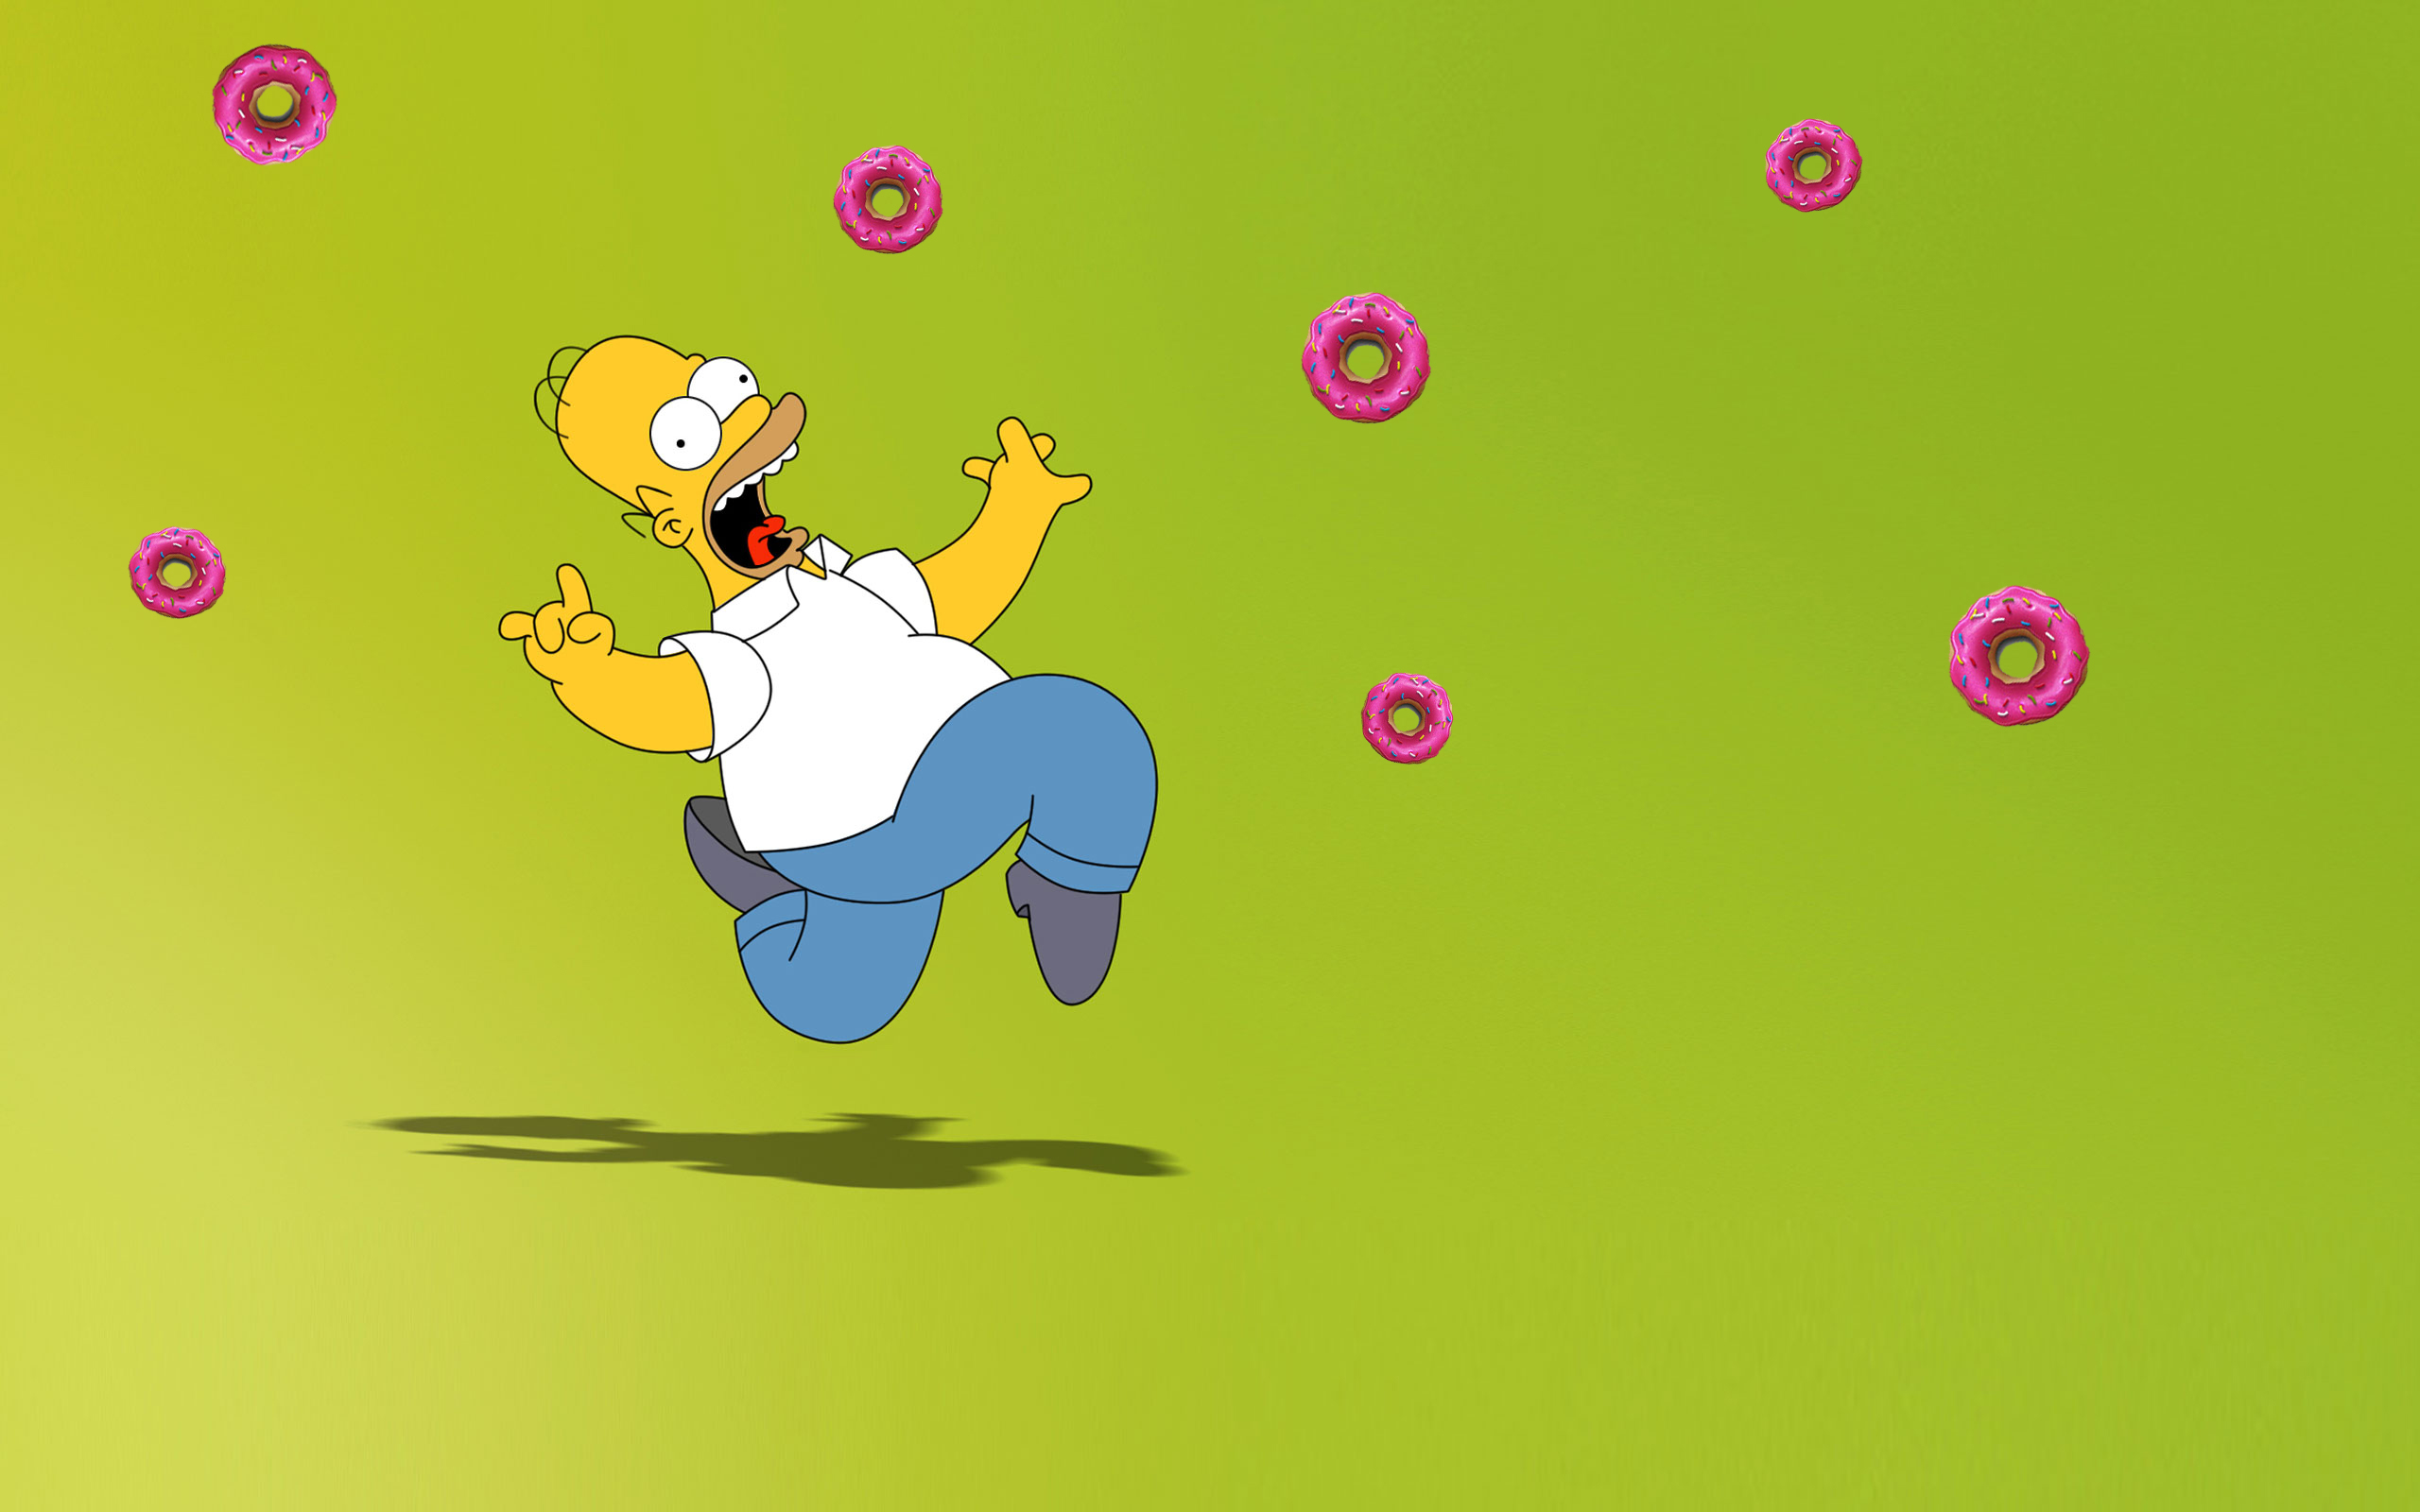 Donuts_and_homer_by_mirry92.jpg